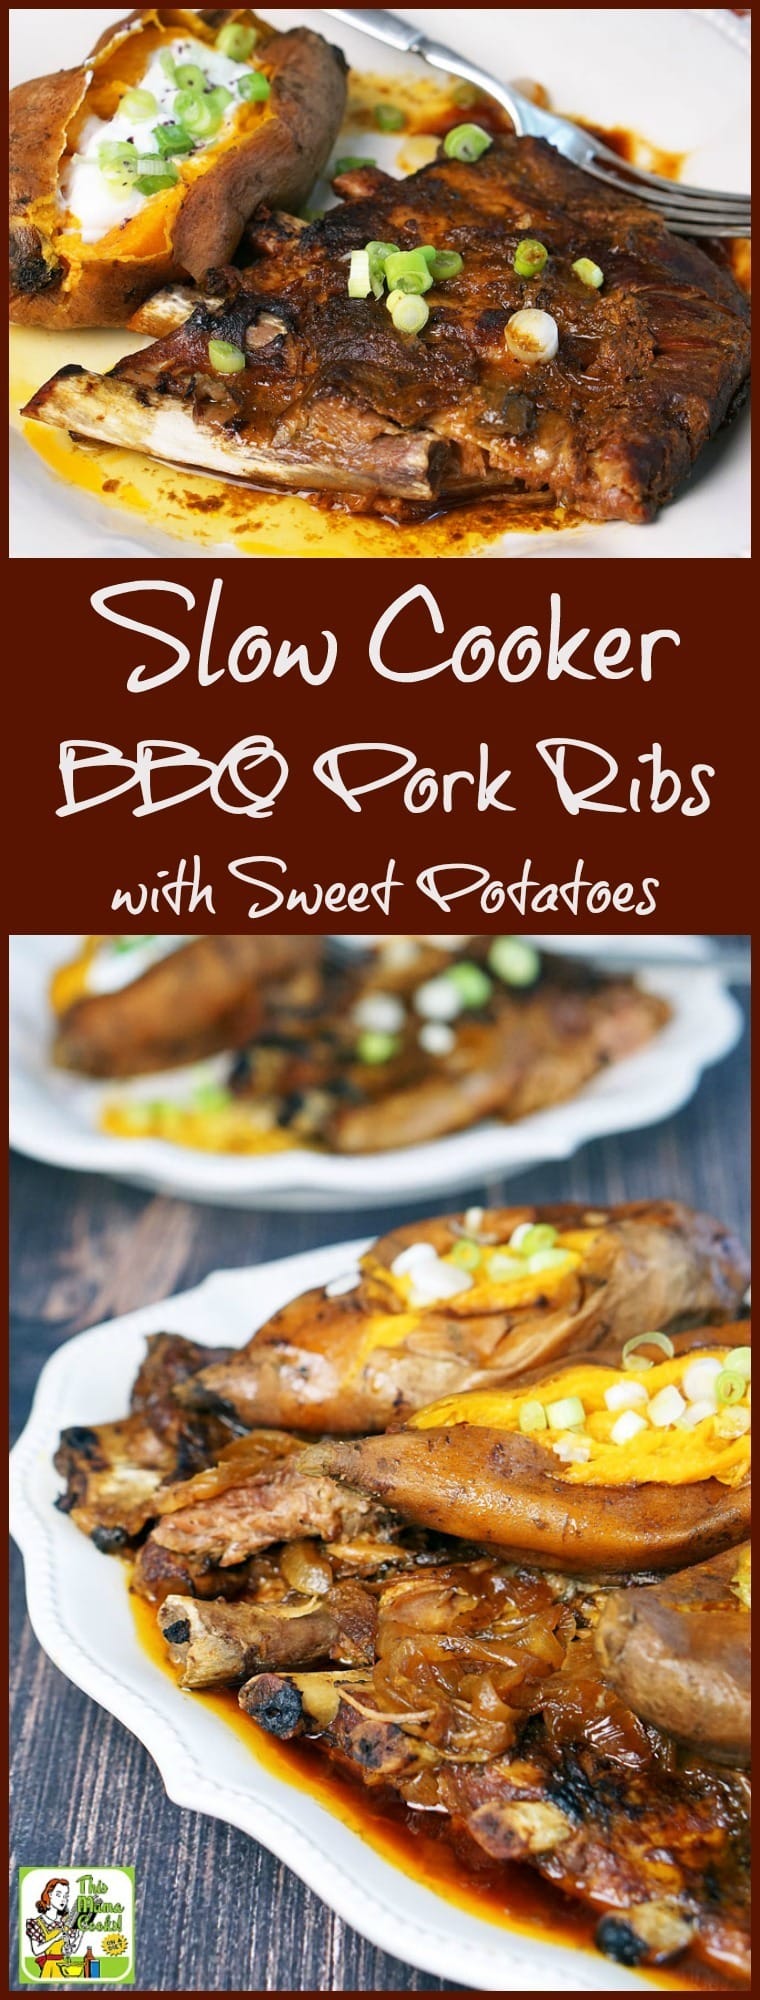 Slow Cooker BBQ Pork Ribs with Sweet Potatoes | This Mama Cooks! On a Diet™